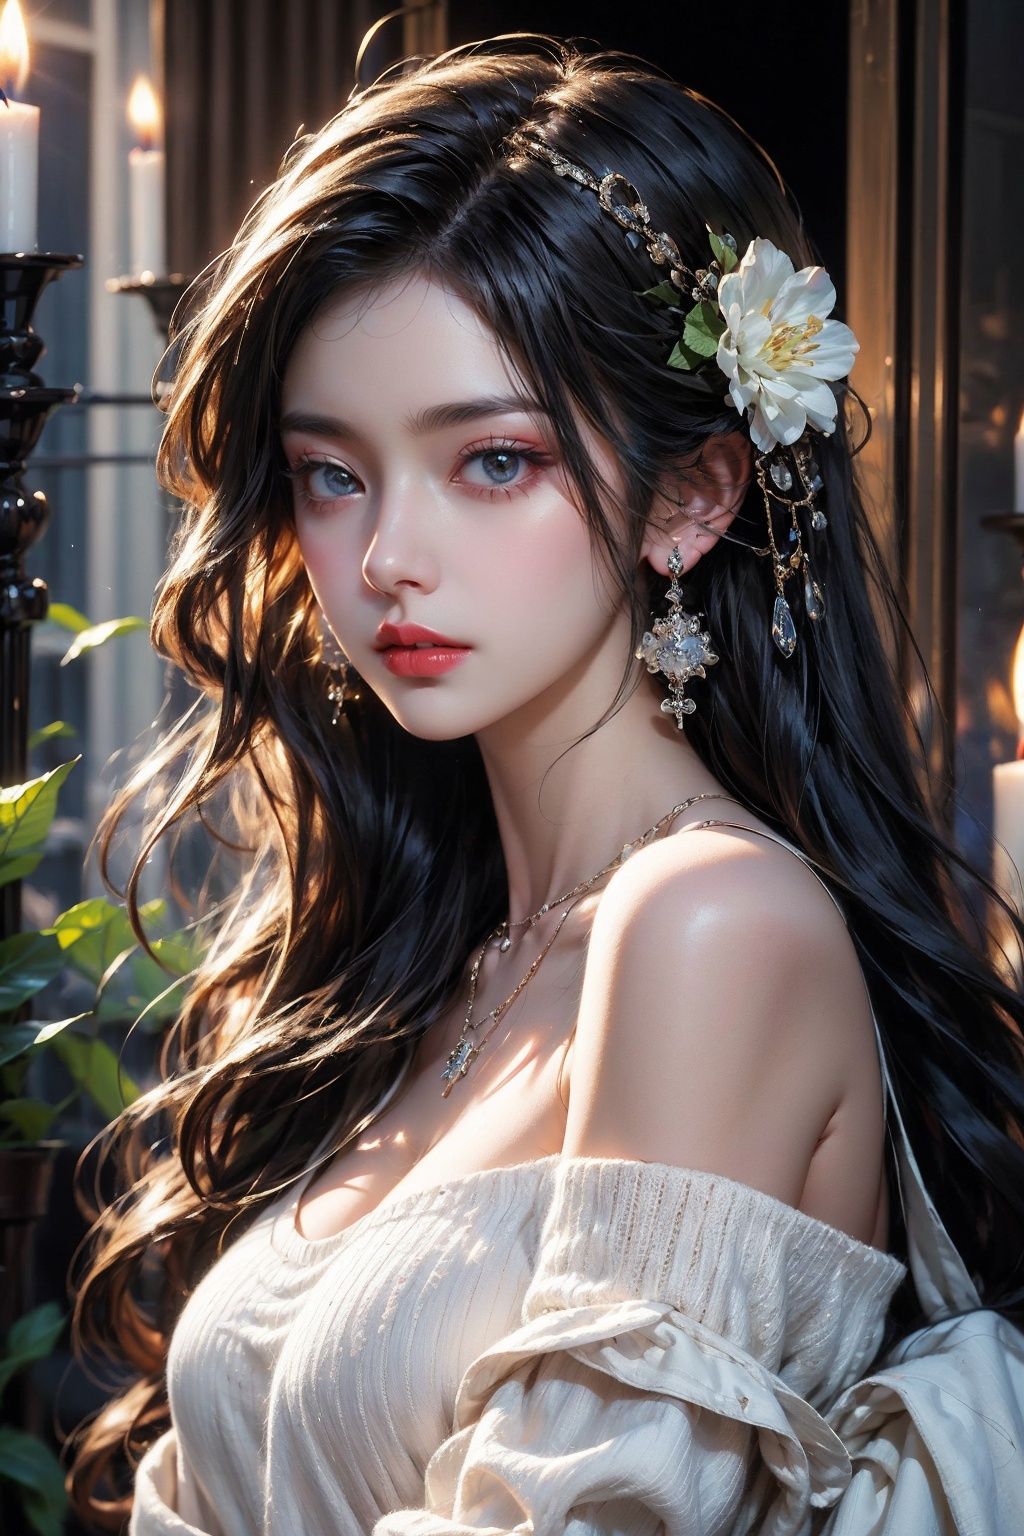 {{masterpiece}}, {best quality}}, {superfine}, {{extremely thin}, 4K, {8K}, best quality, {beauty}, a girl, solo, white knitwear, jewelry, earrings, long hair, black hair, necklace, bare shoulders, flowers, red lips, hair accessories, upper body, off shoulder, powder blusher, makeup, lips, candles, collarbone, long sleeves, Tyndall effect, 8K, big halo, century masterpiece, corridor,

